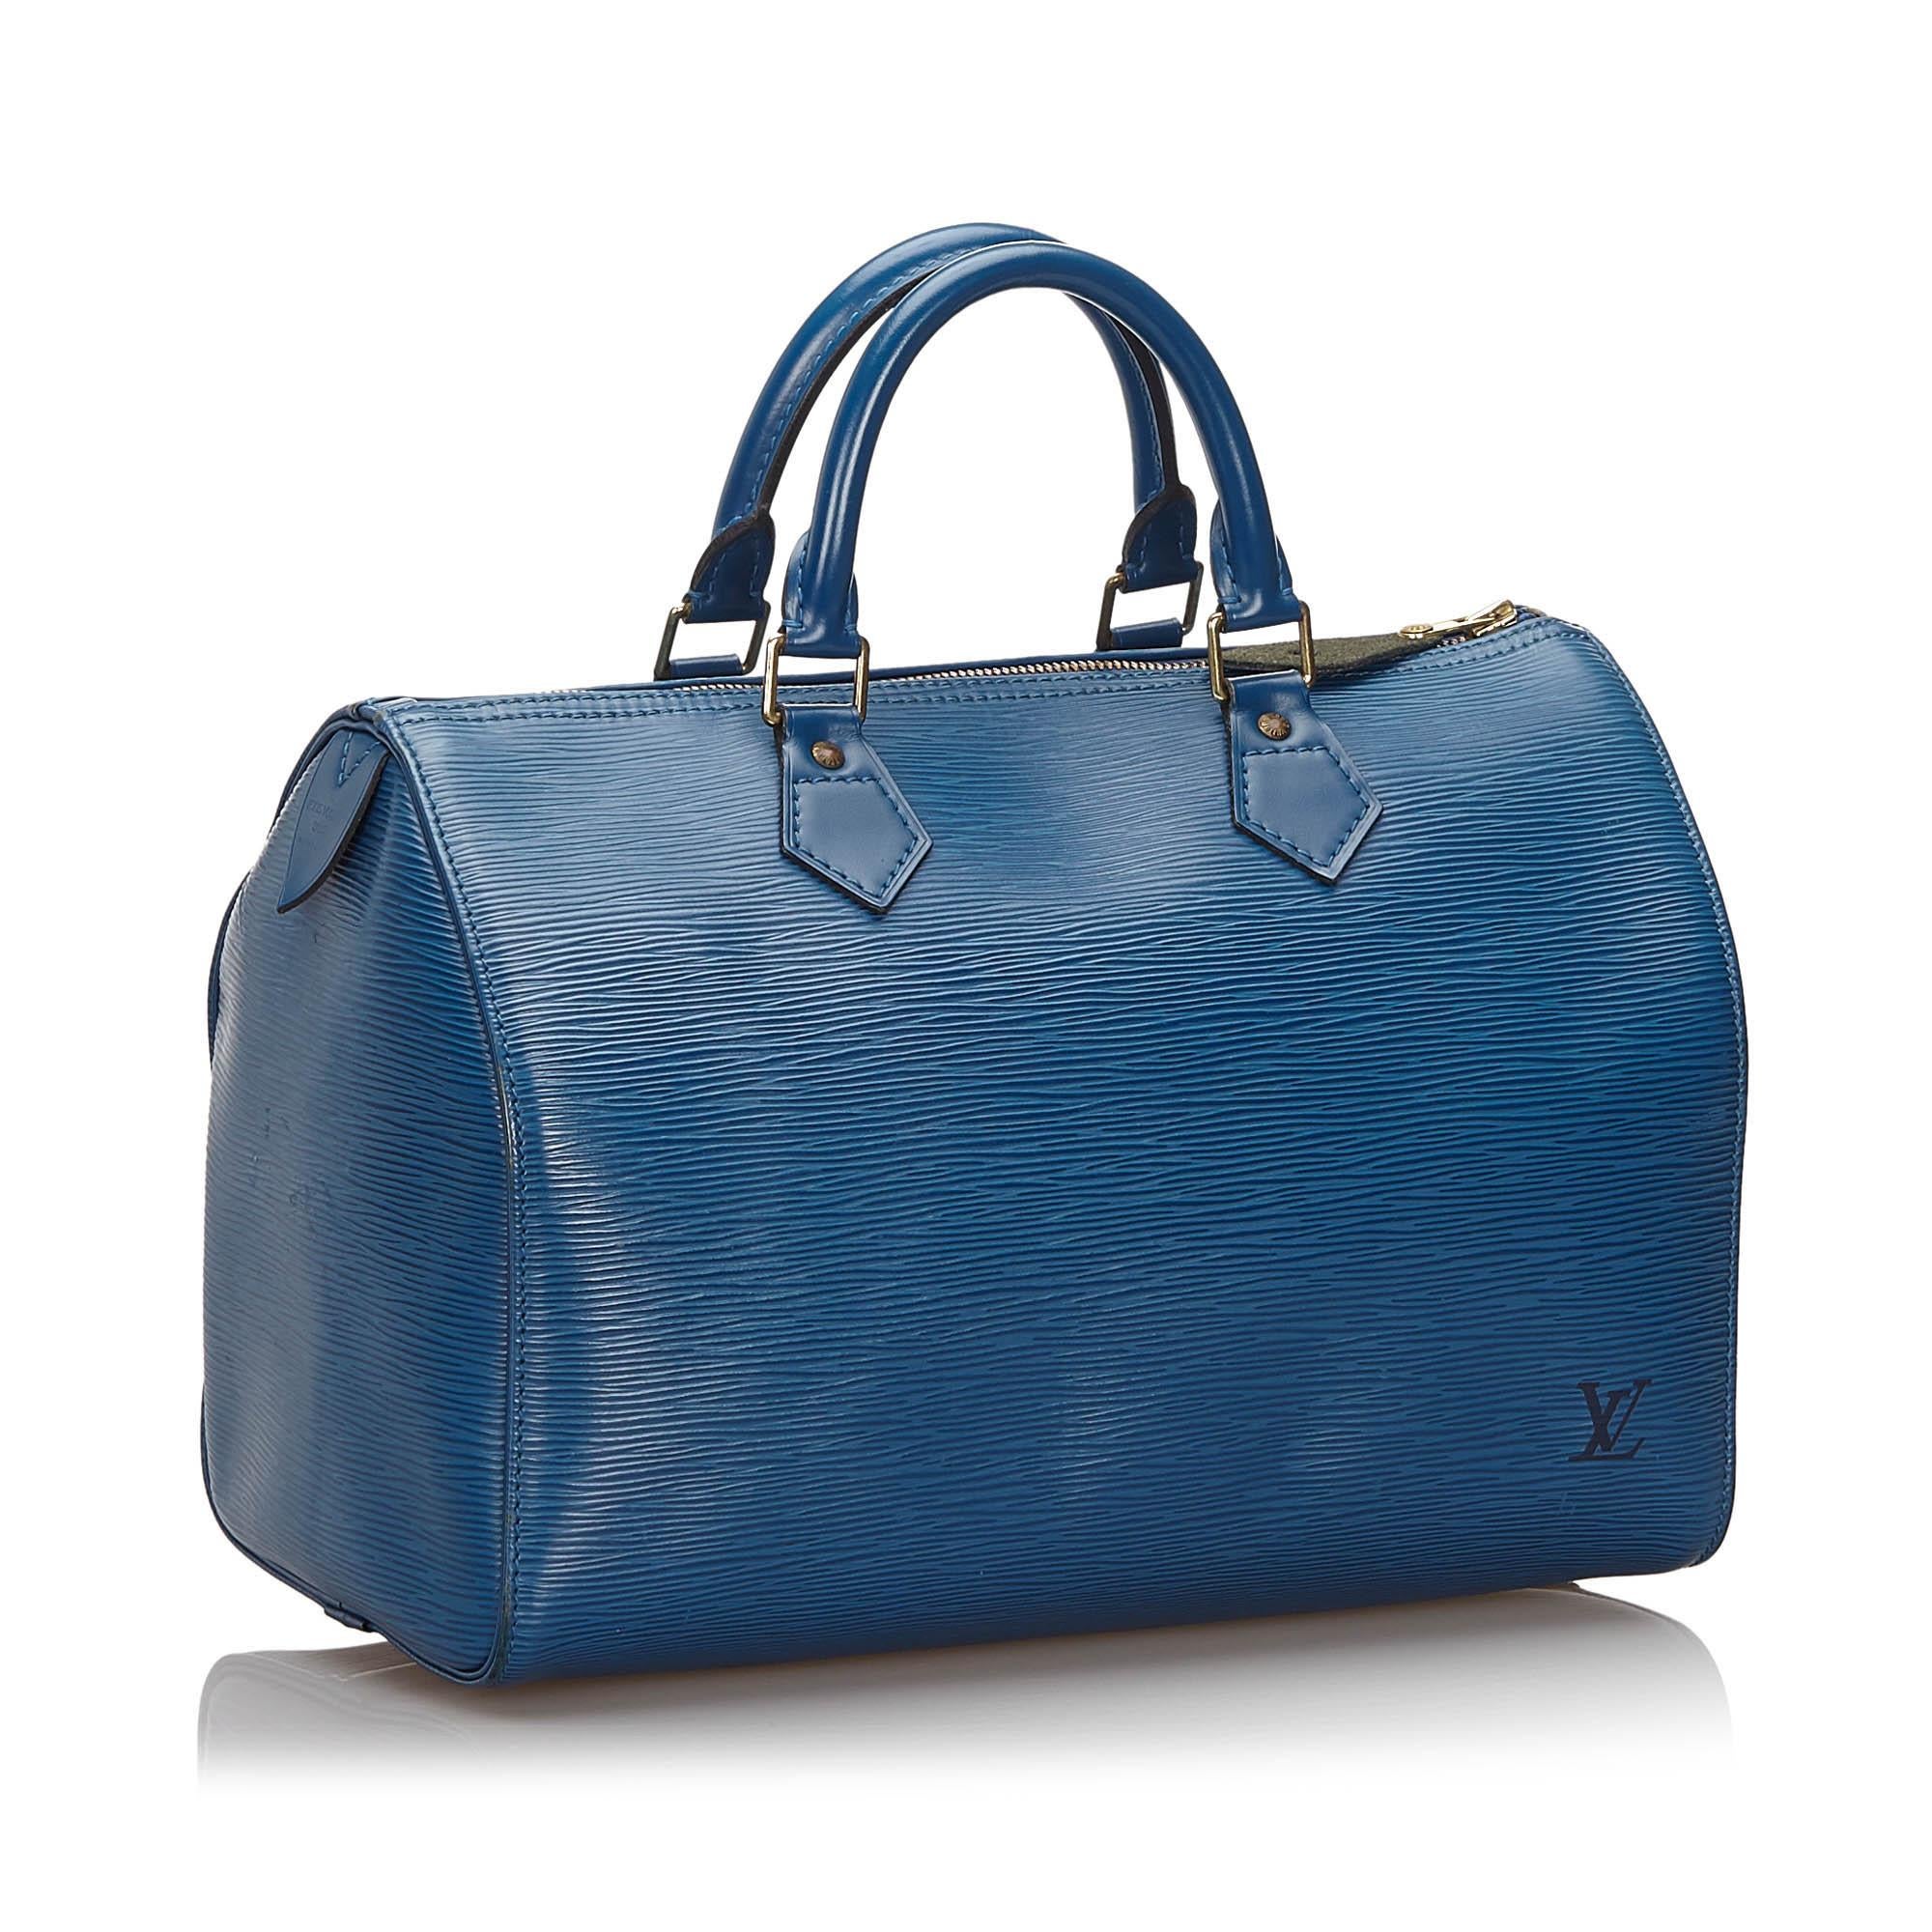 The Speedy 30 features an epi leather body, a side exterior slip pocket, rolled leather handles, a top zip closure, and an interior slip pocket. It carries as B+ condition rating.

Inclusions: 
This item does not come with inclusions.


Louis